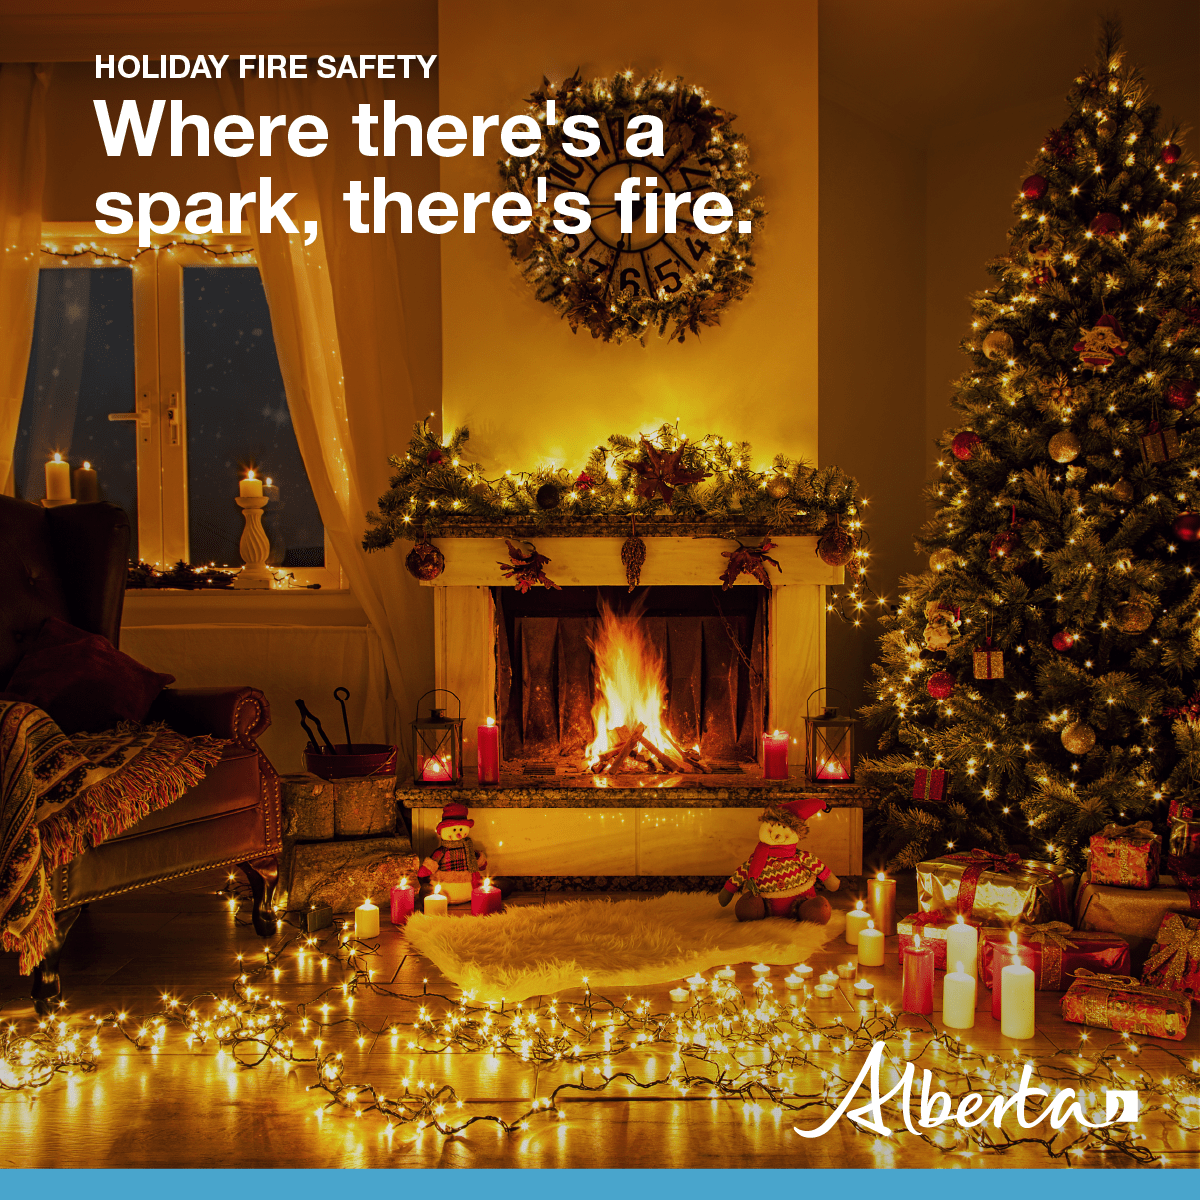 Leaving your tree up after Christmas for a little extra festive cheer? Dry trees and faulty lights are a common cause of holiday fires. Make sure to keep real trees well-watered, avoid overloading electrical outlets and turn lights off when you're not home.